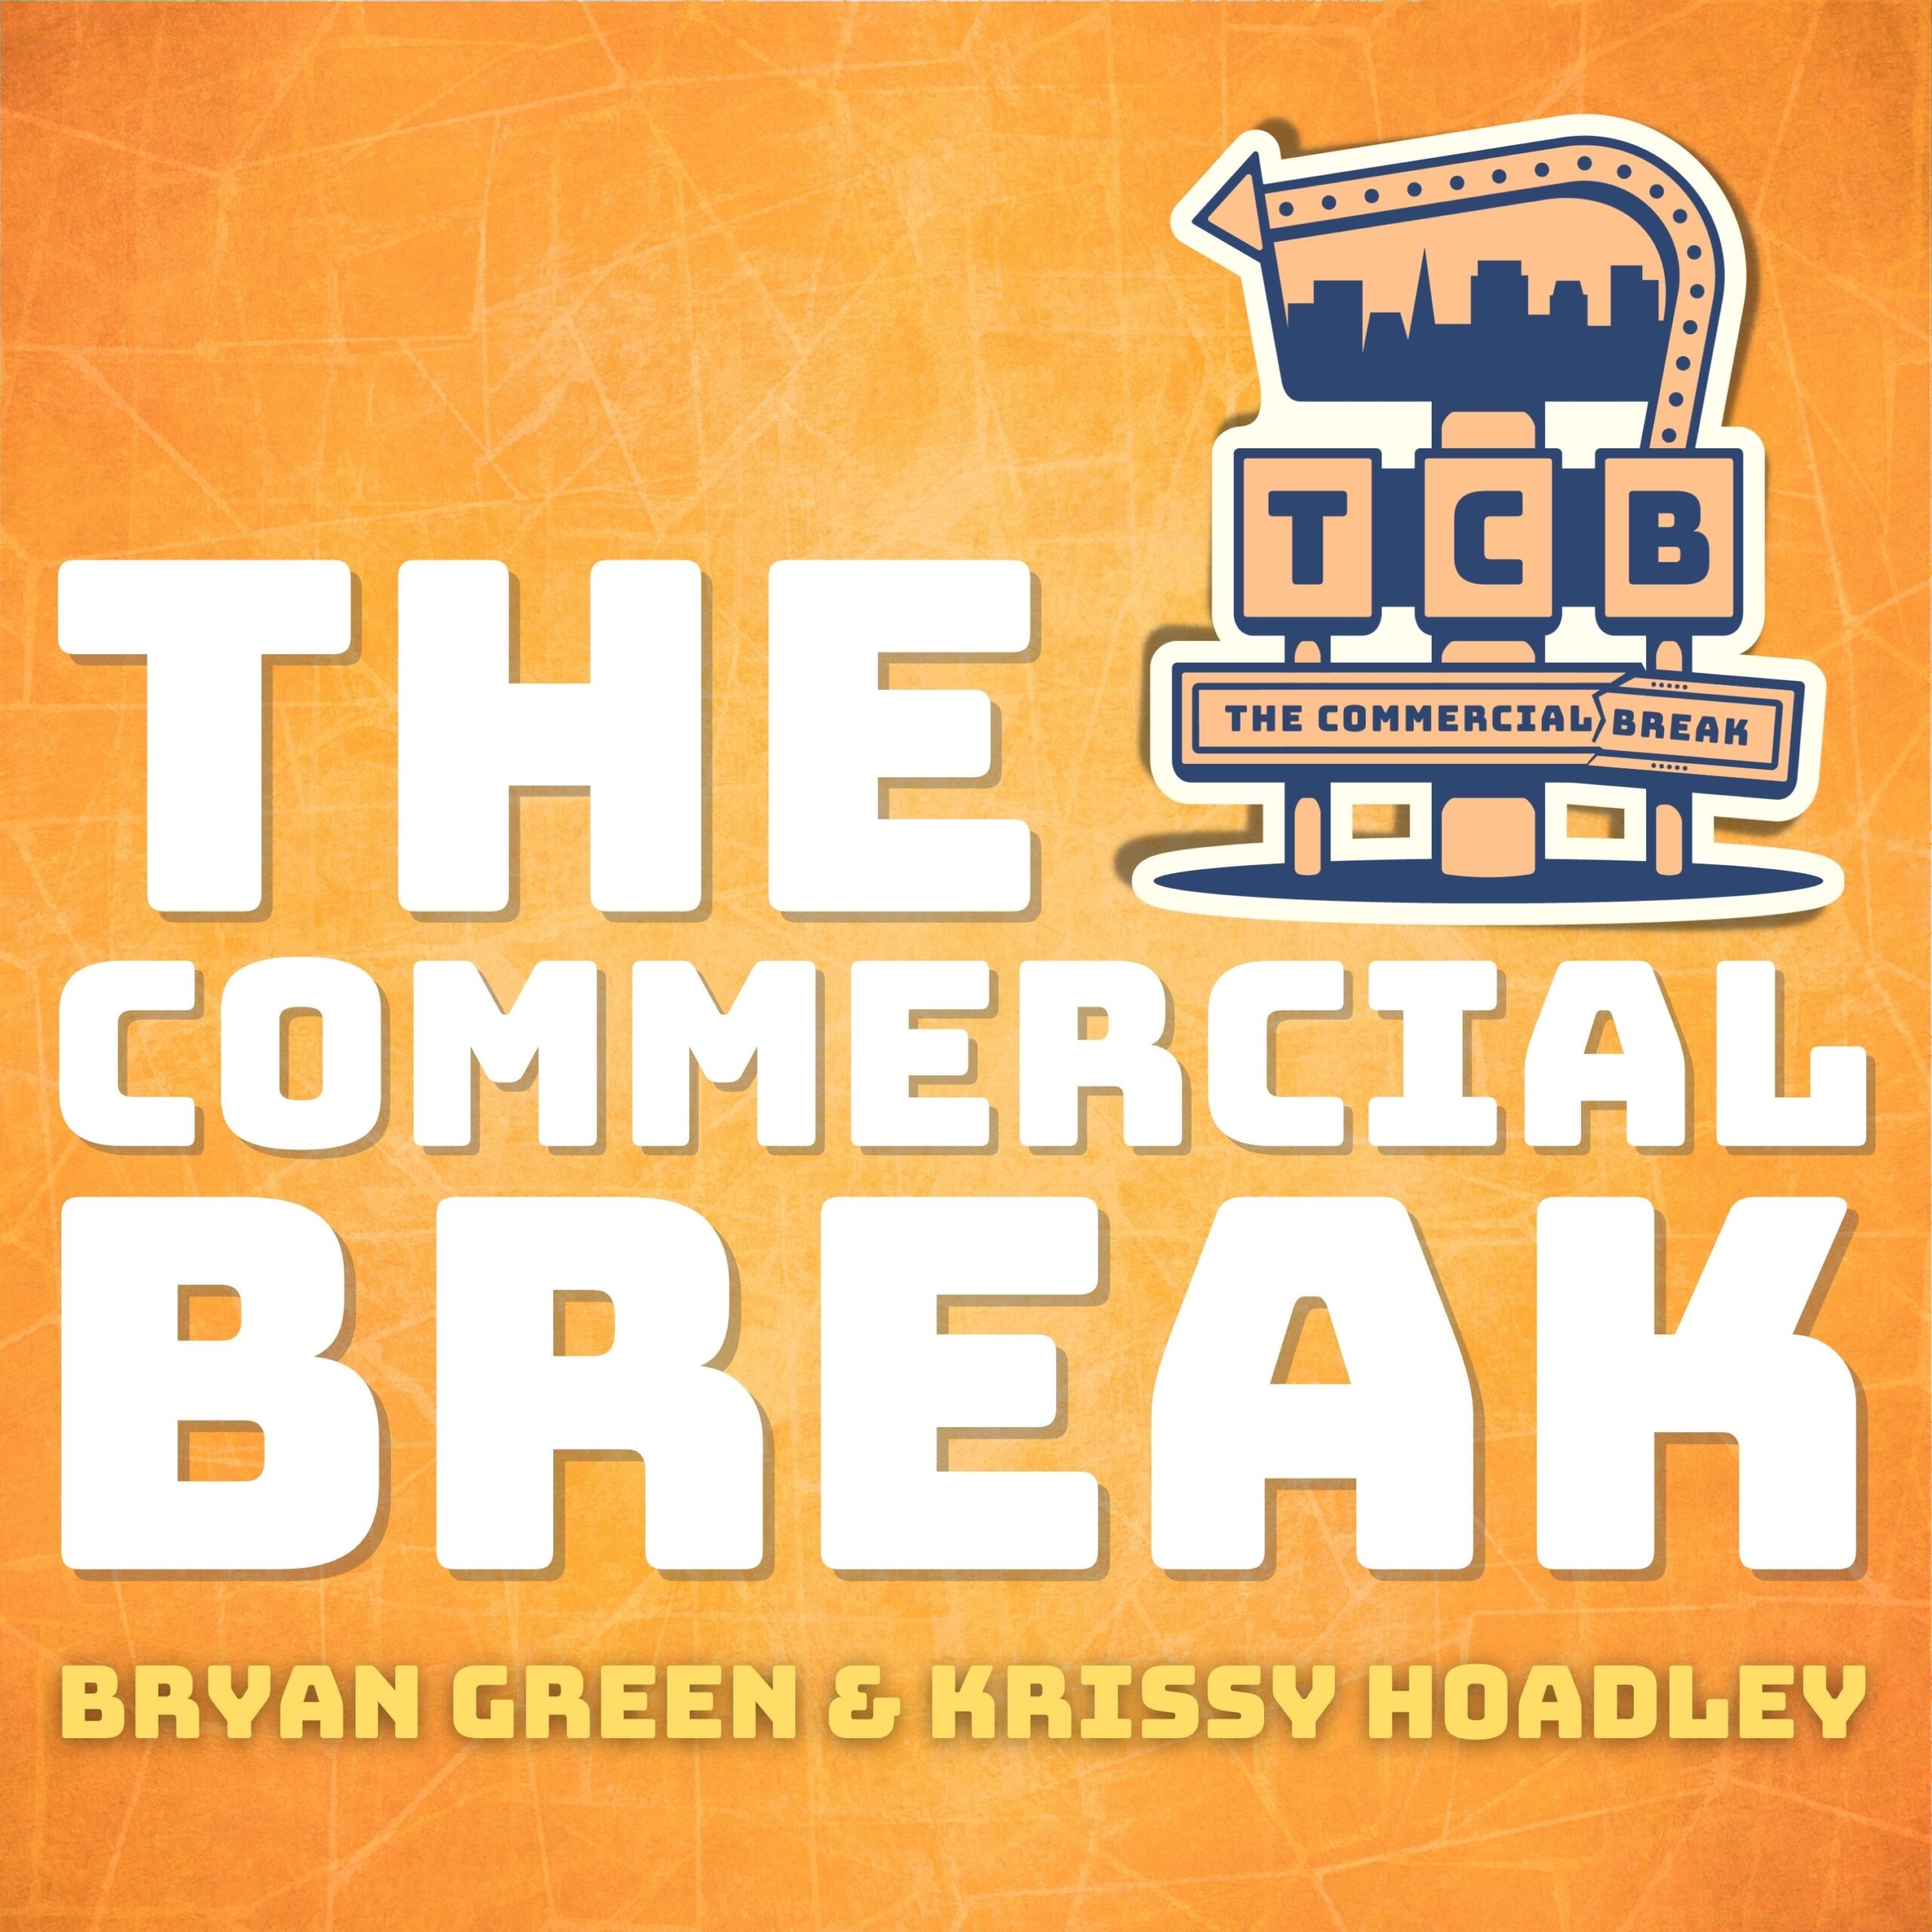 Advertise on “The Commercial Break Podcast”